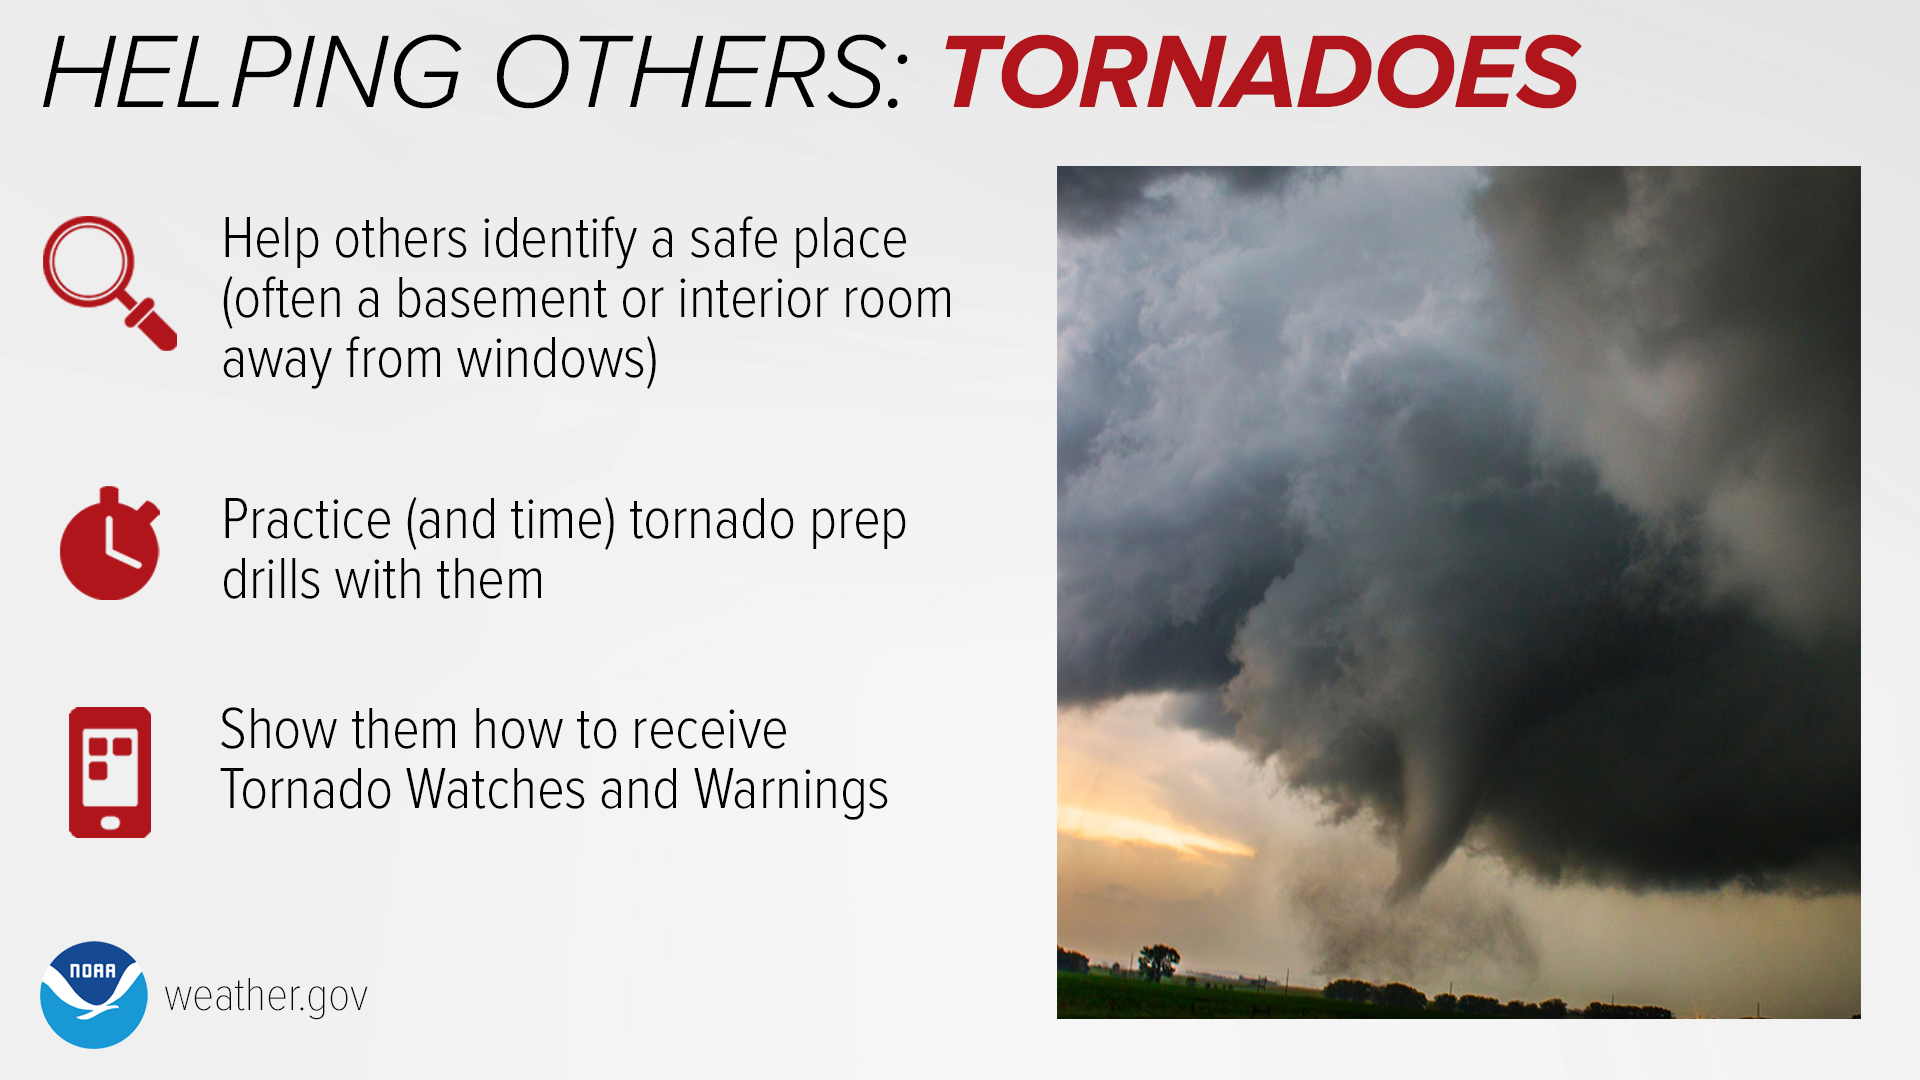 Helping Others: Tornadoes. Help others identify a safe place (often a basement or interior room away from windows). Practice (and time) tornado prep drills with them. Show them how to receive Tornado Watches and Warnings.